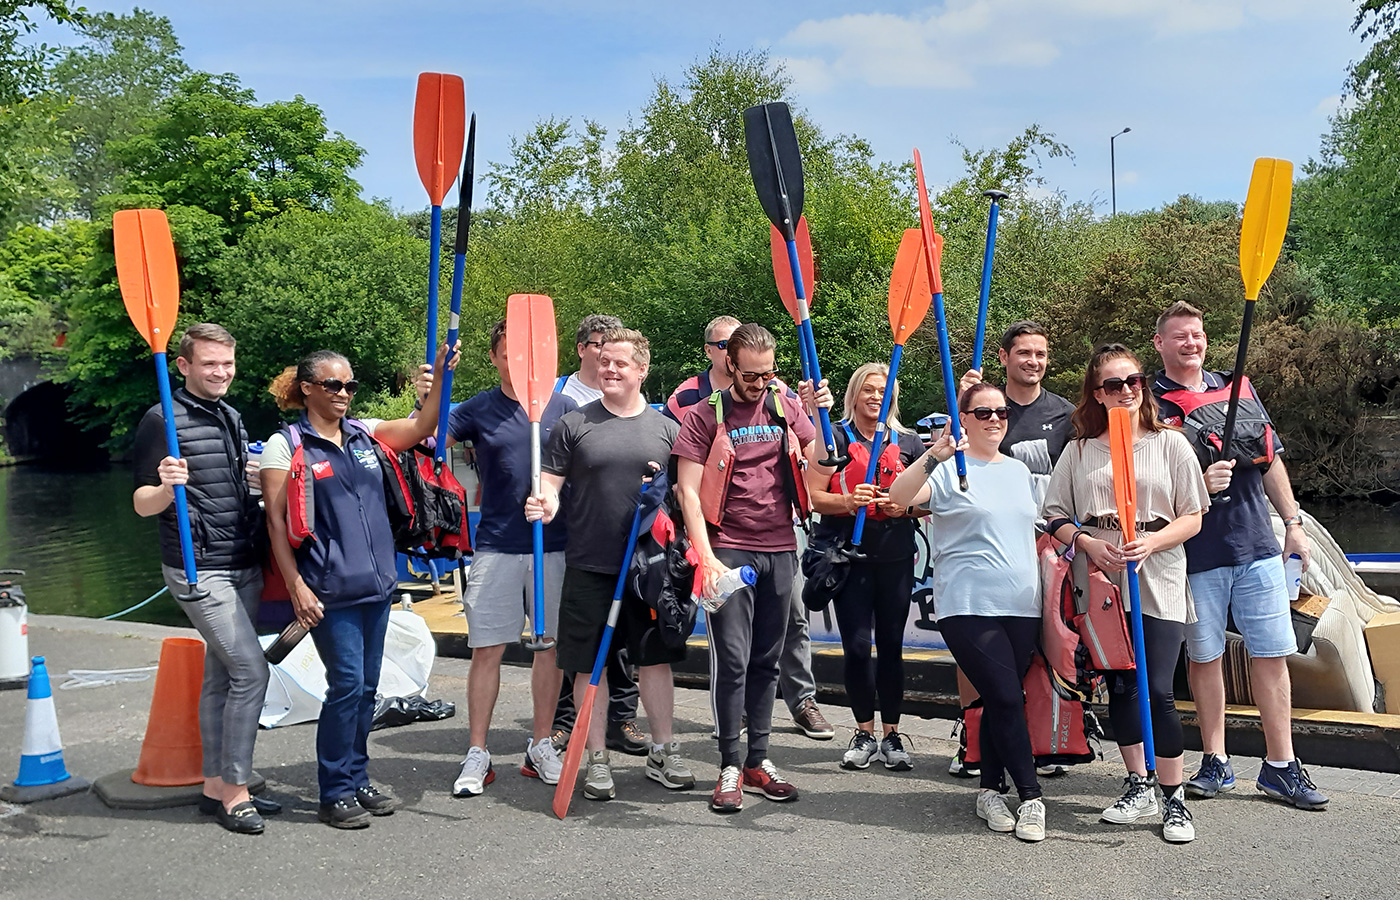 GL events UK undertakes waterborne litter collection with Canal & River Trust